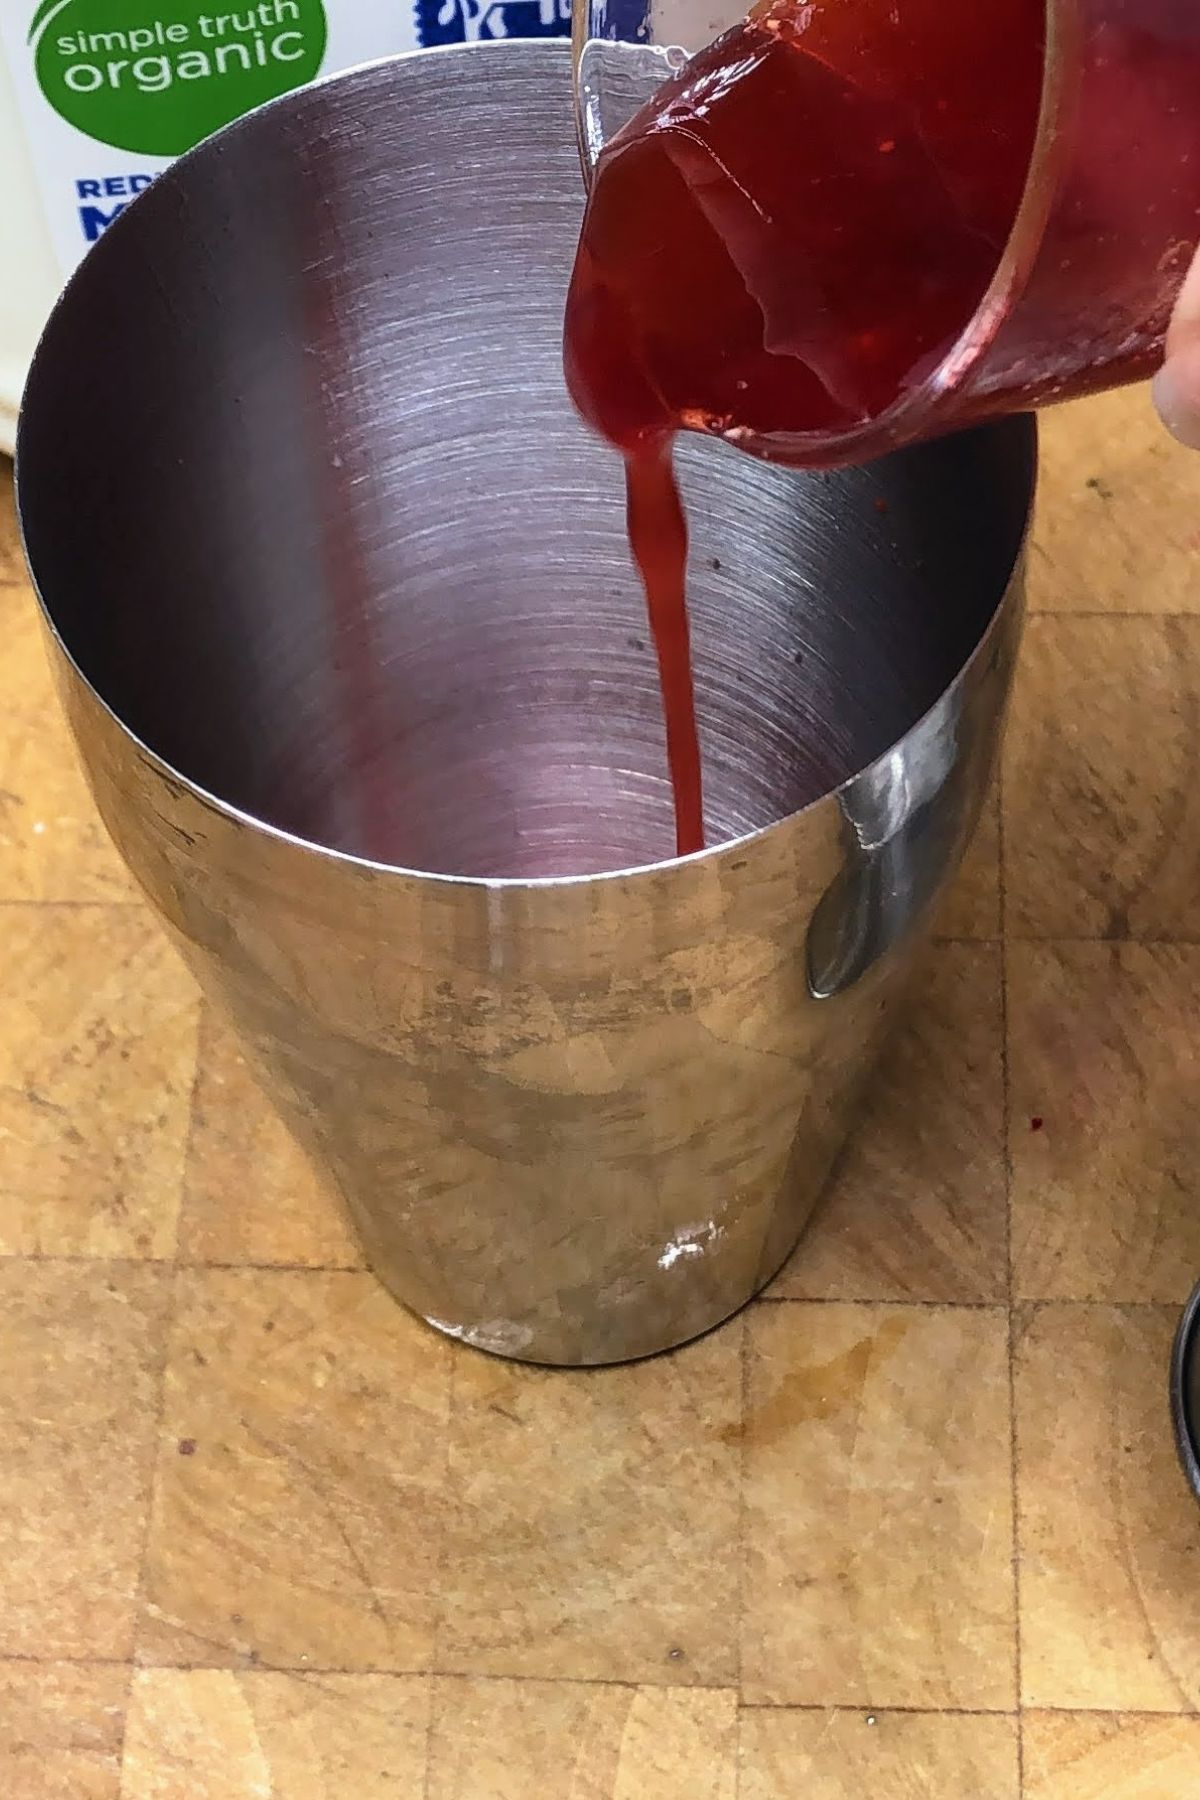 Pouring simple syrup into a shaker.